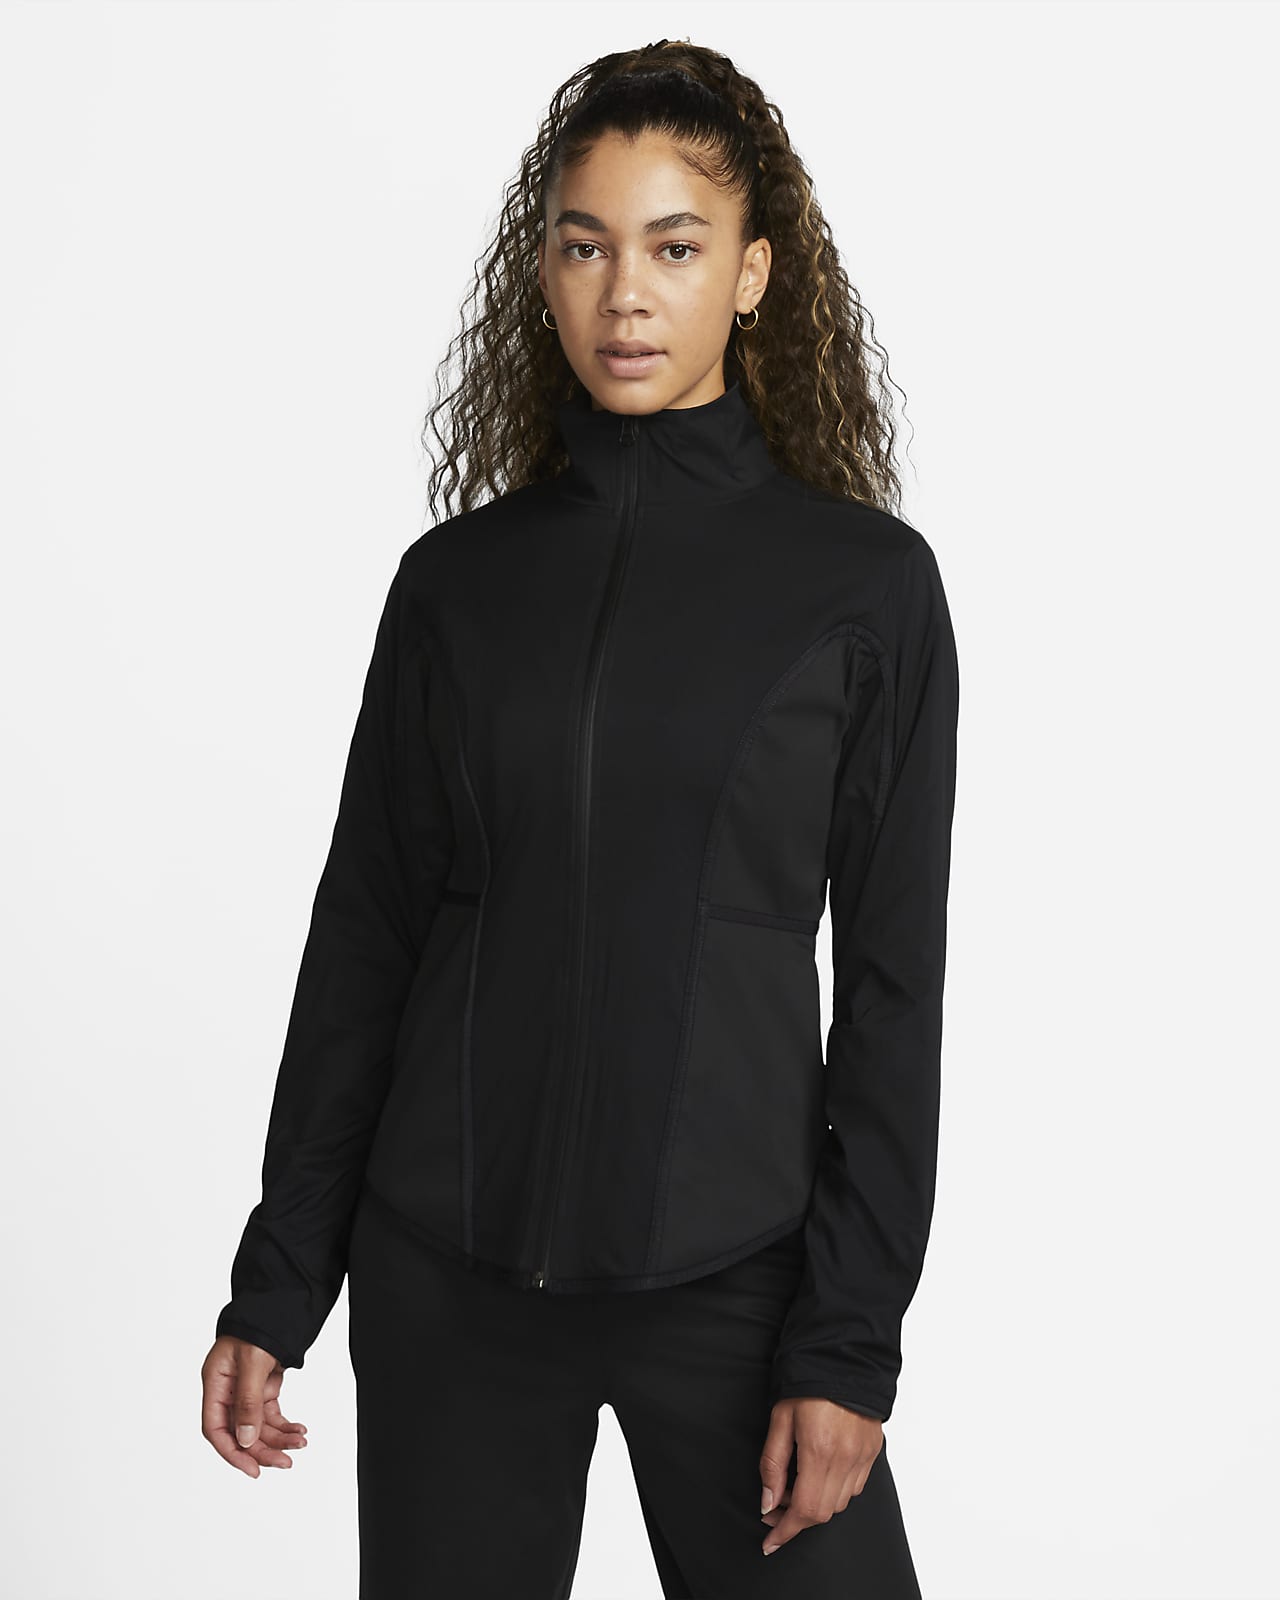 Nike Storm-FIT Run Division Women's Running Jacket